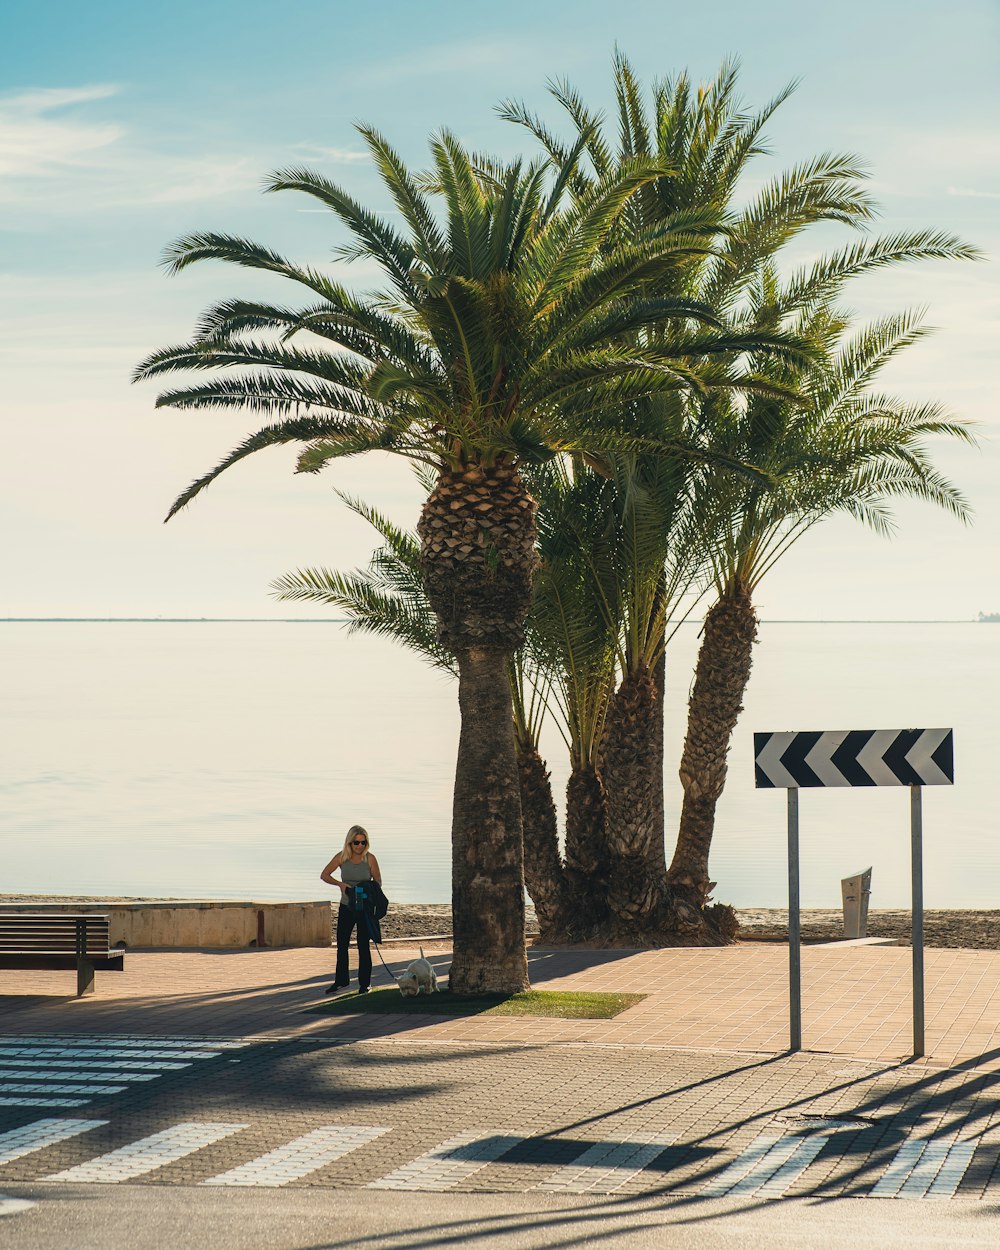 a person standing next to a palm tree